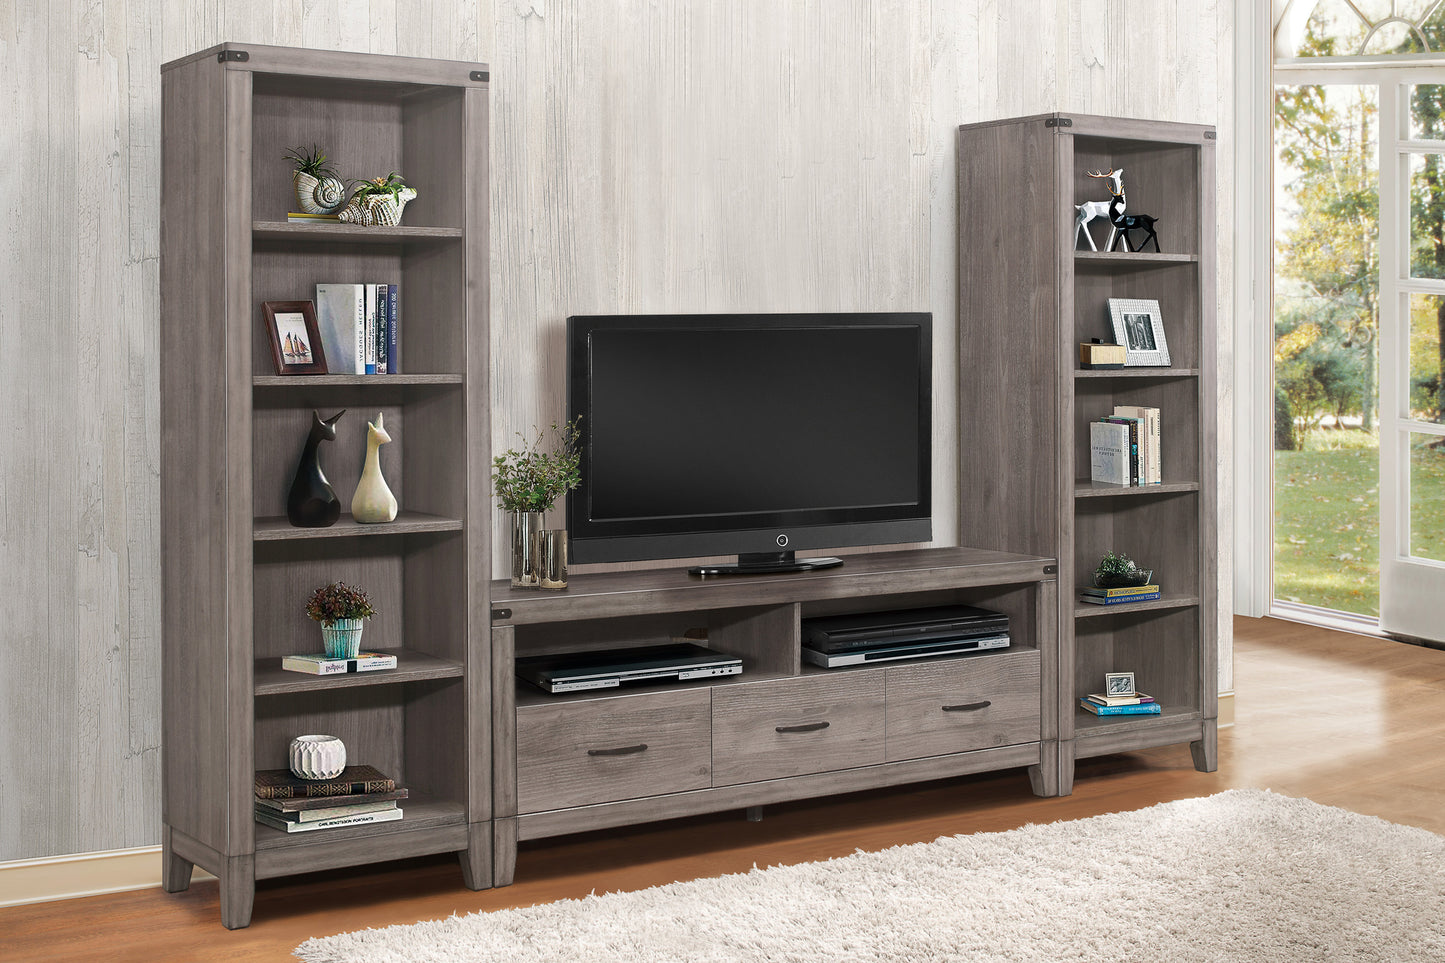 Woodrow 66" TV Stand ONE COLOR ONLY